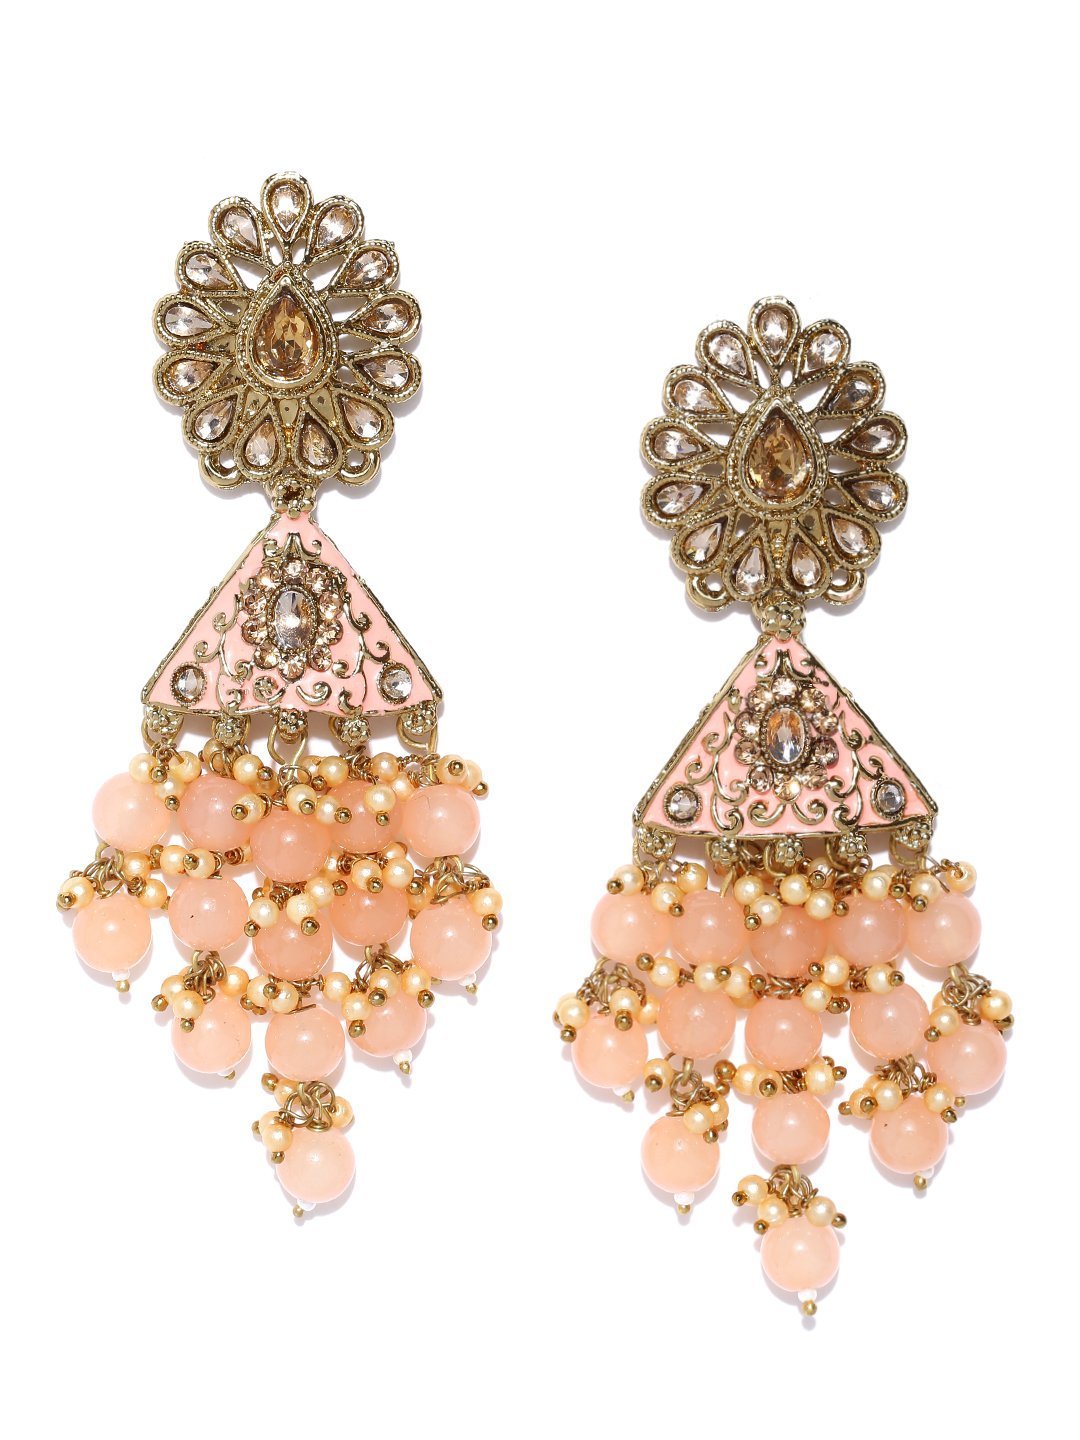 Women's Gold-Plated Stone Studded Floral Patterned Meenakari Earrings with Beads Drop in Peach Color - Priyaasi